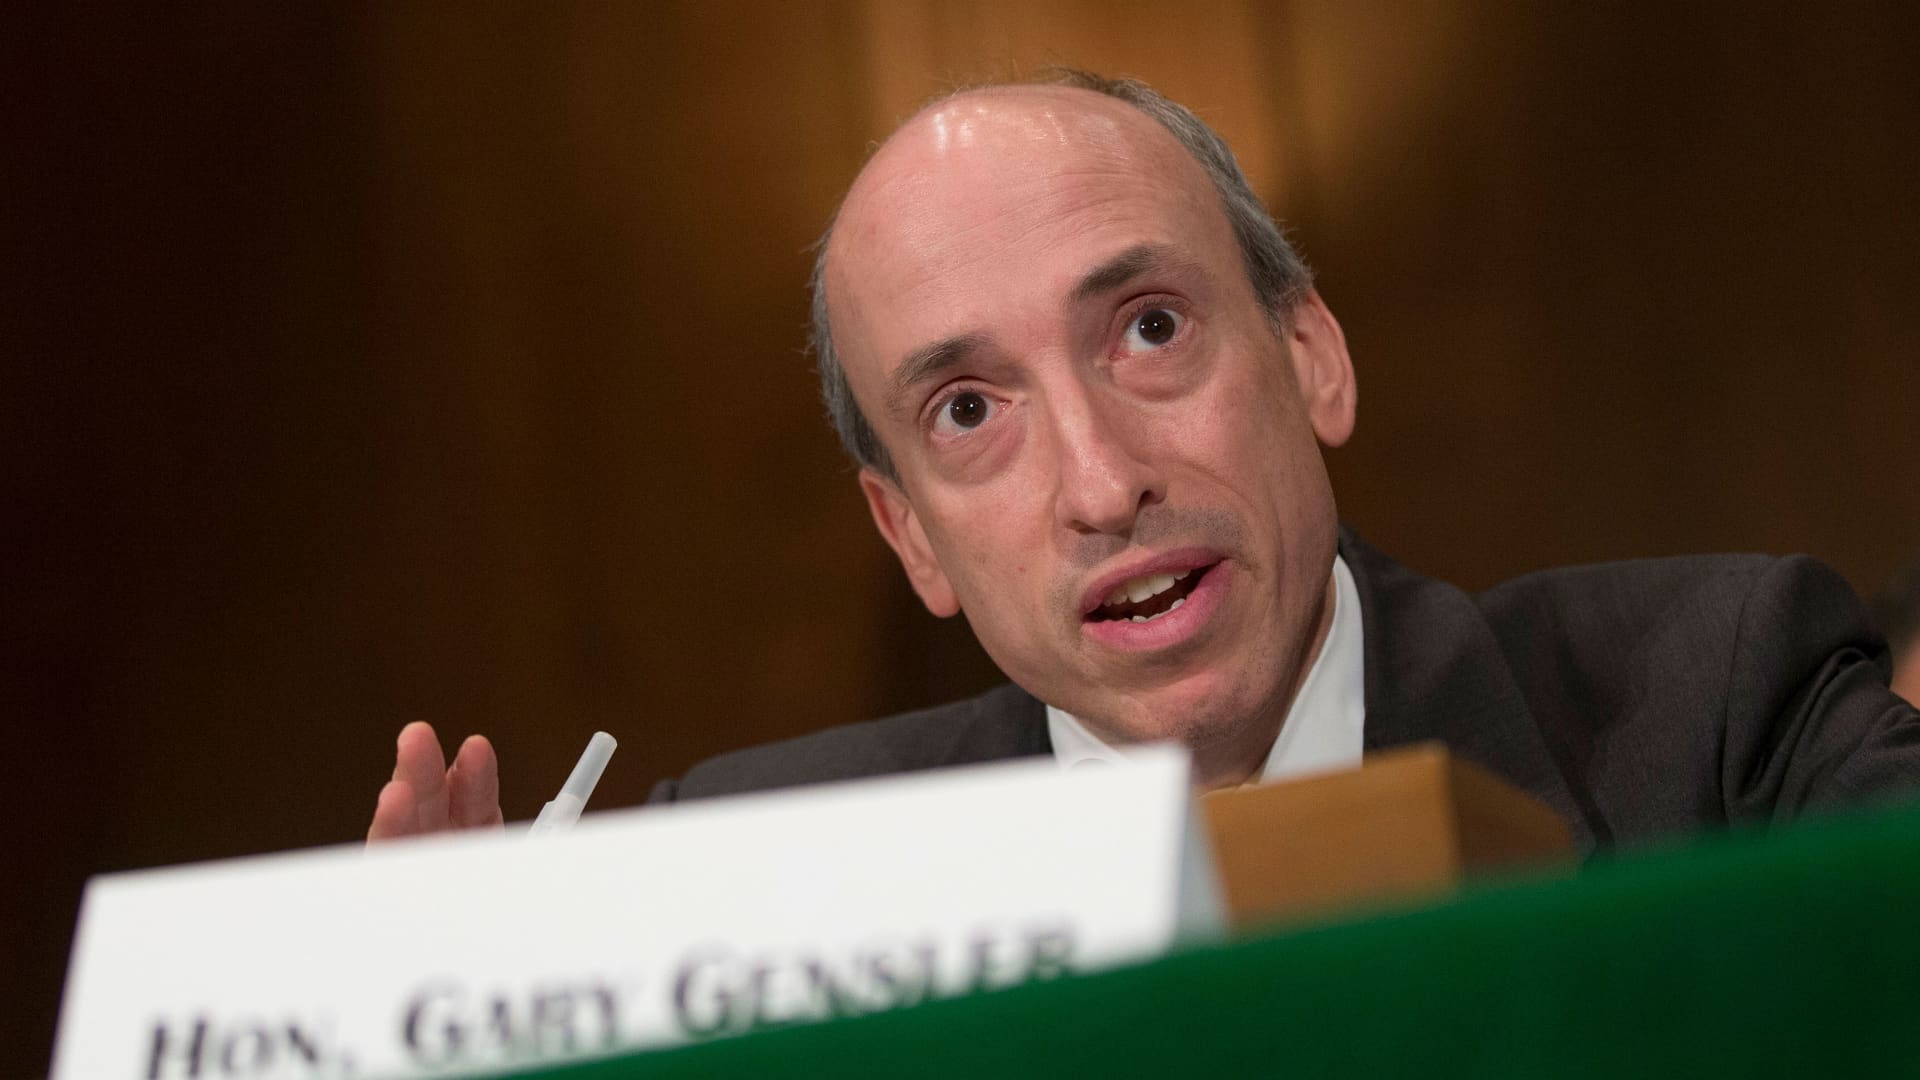 Gary Gensler, chairman of the Commodity Futures Trading Commission (CFTC), speaks during a Senate Banking Committee hearing in Washington, D.C., U.S., on Tuesday, July 30, 2013.